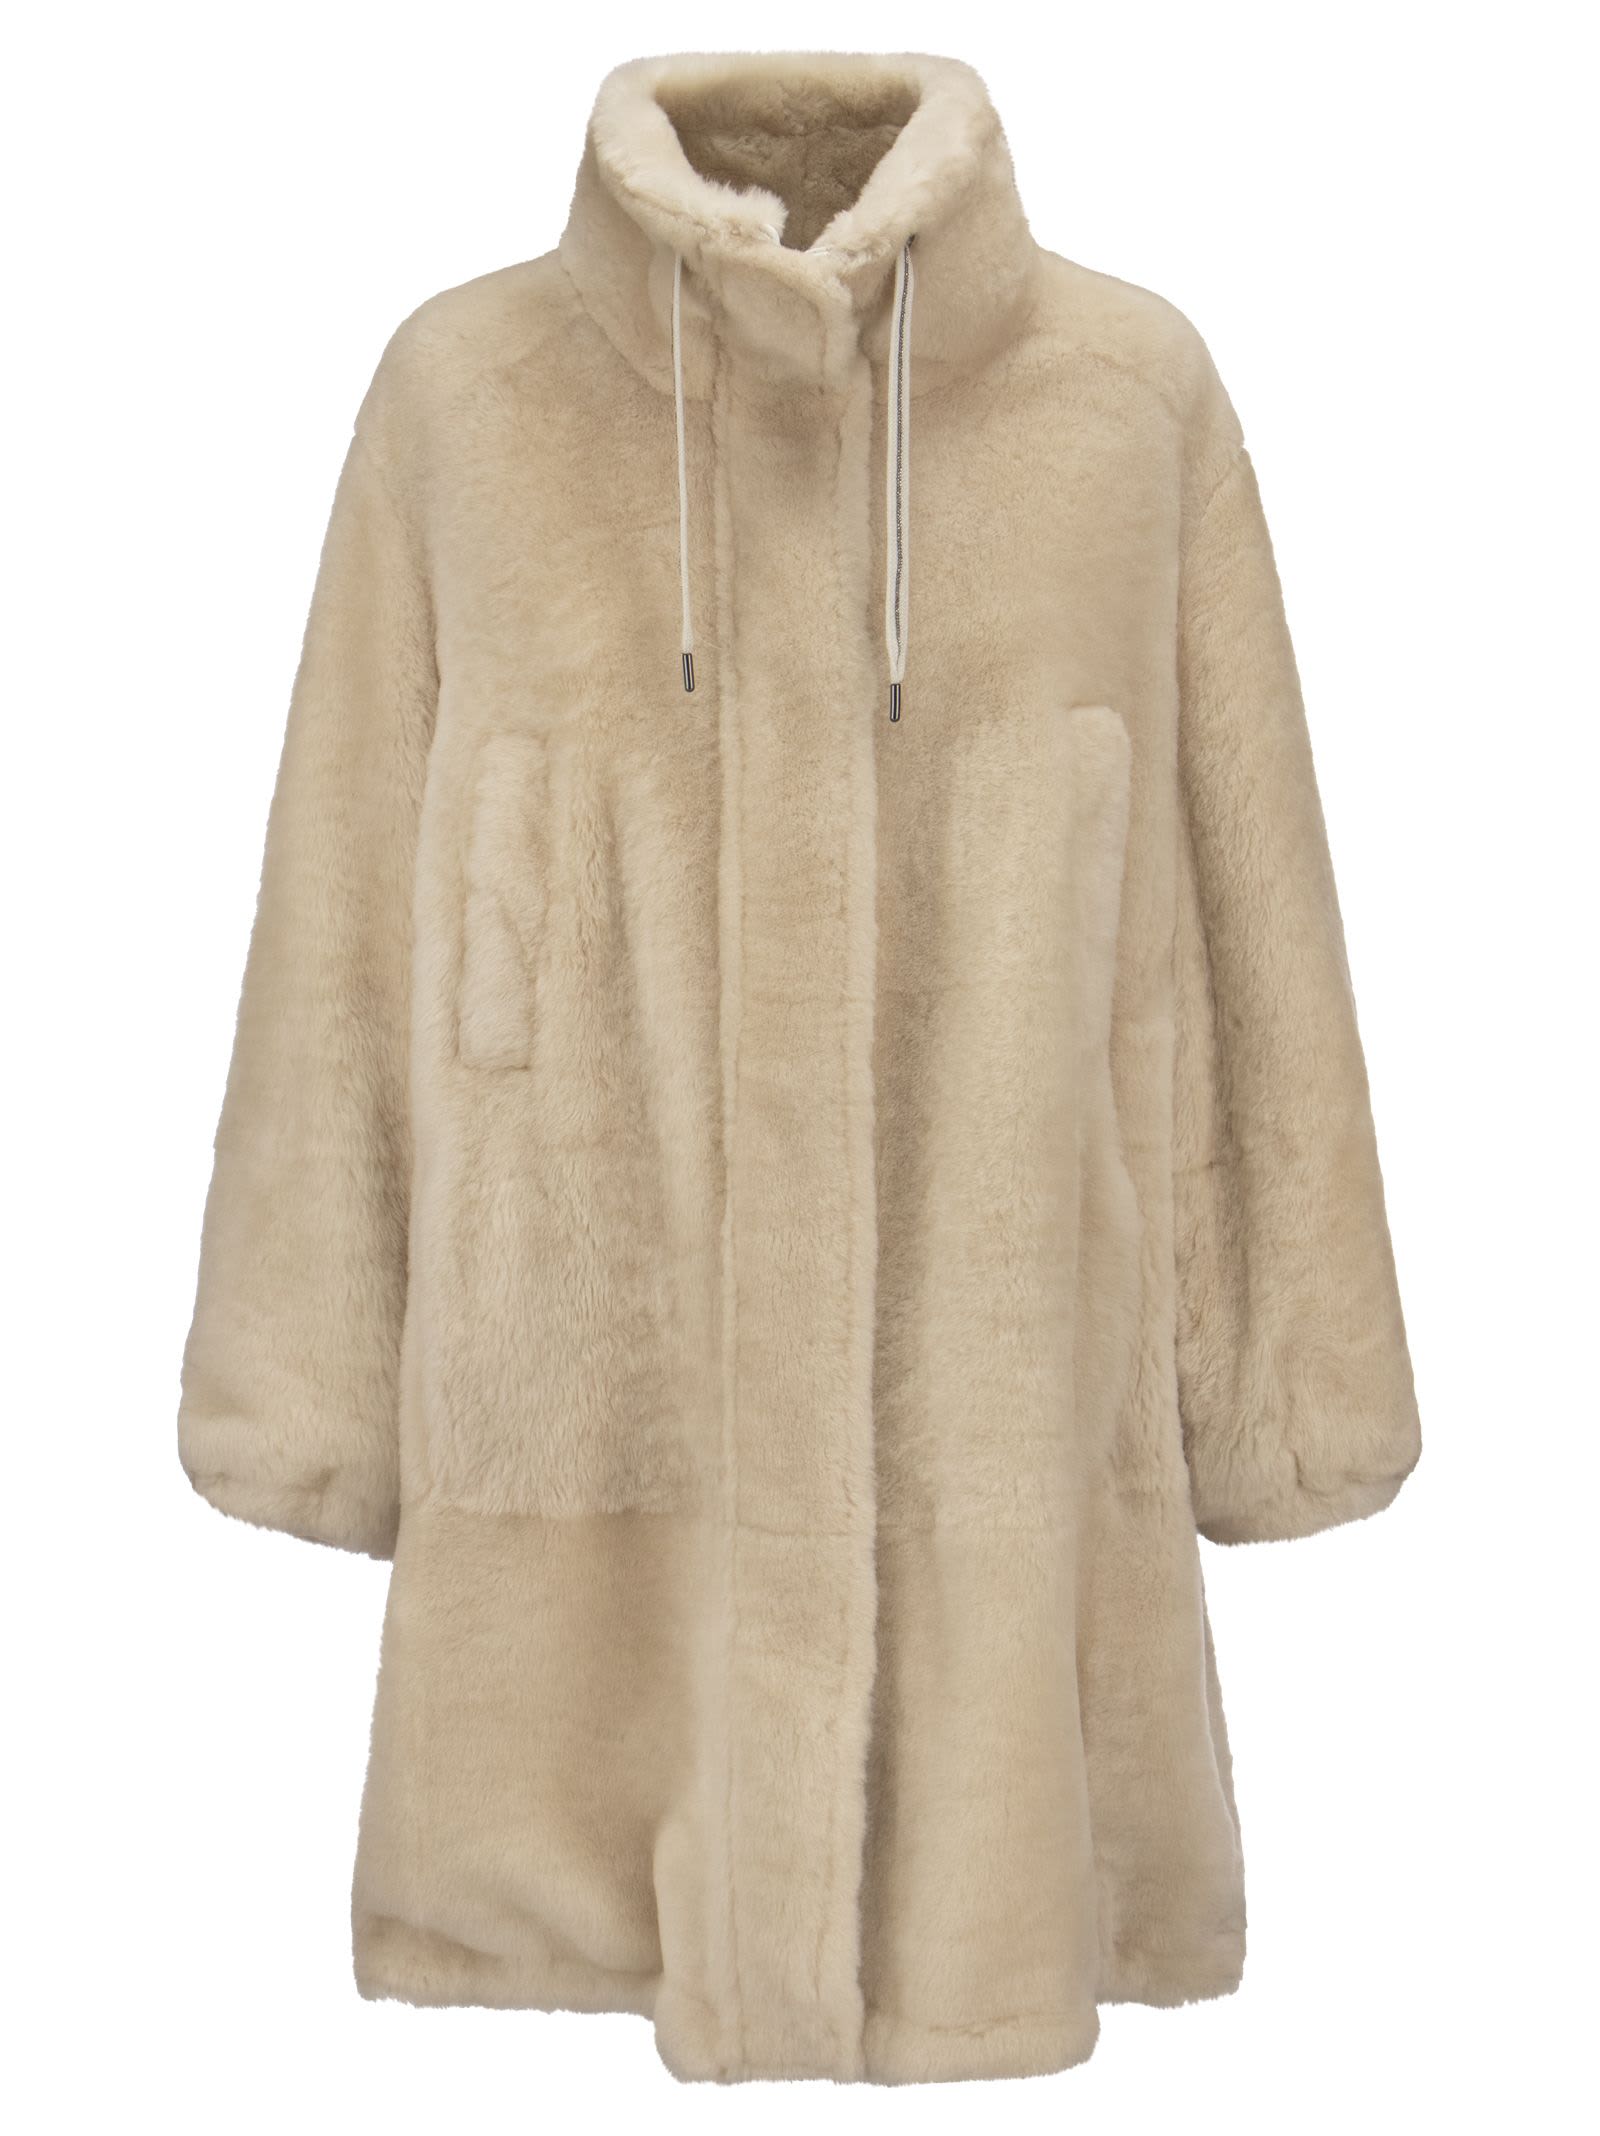 Brunello Cucinelli Outerwear Sherling Soft With Shiny Drawstring Collar